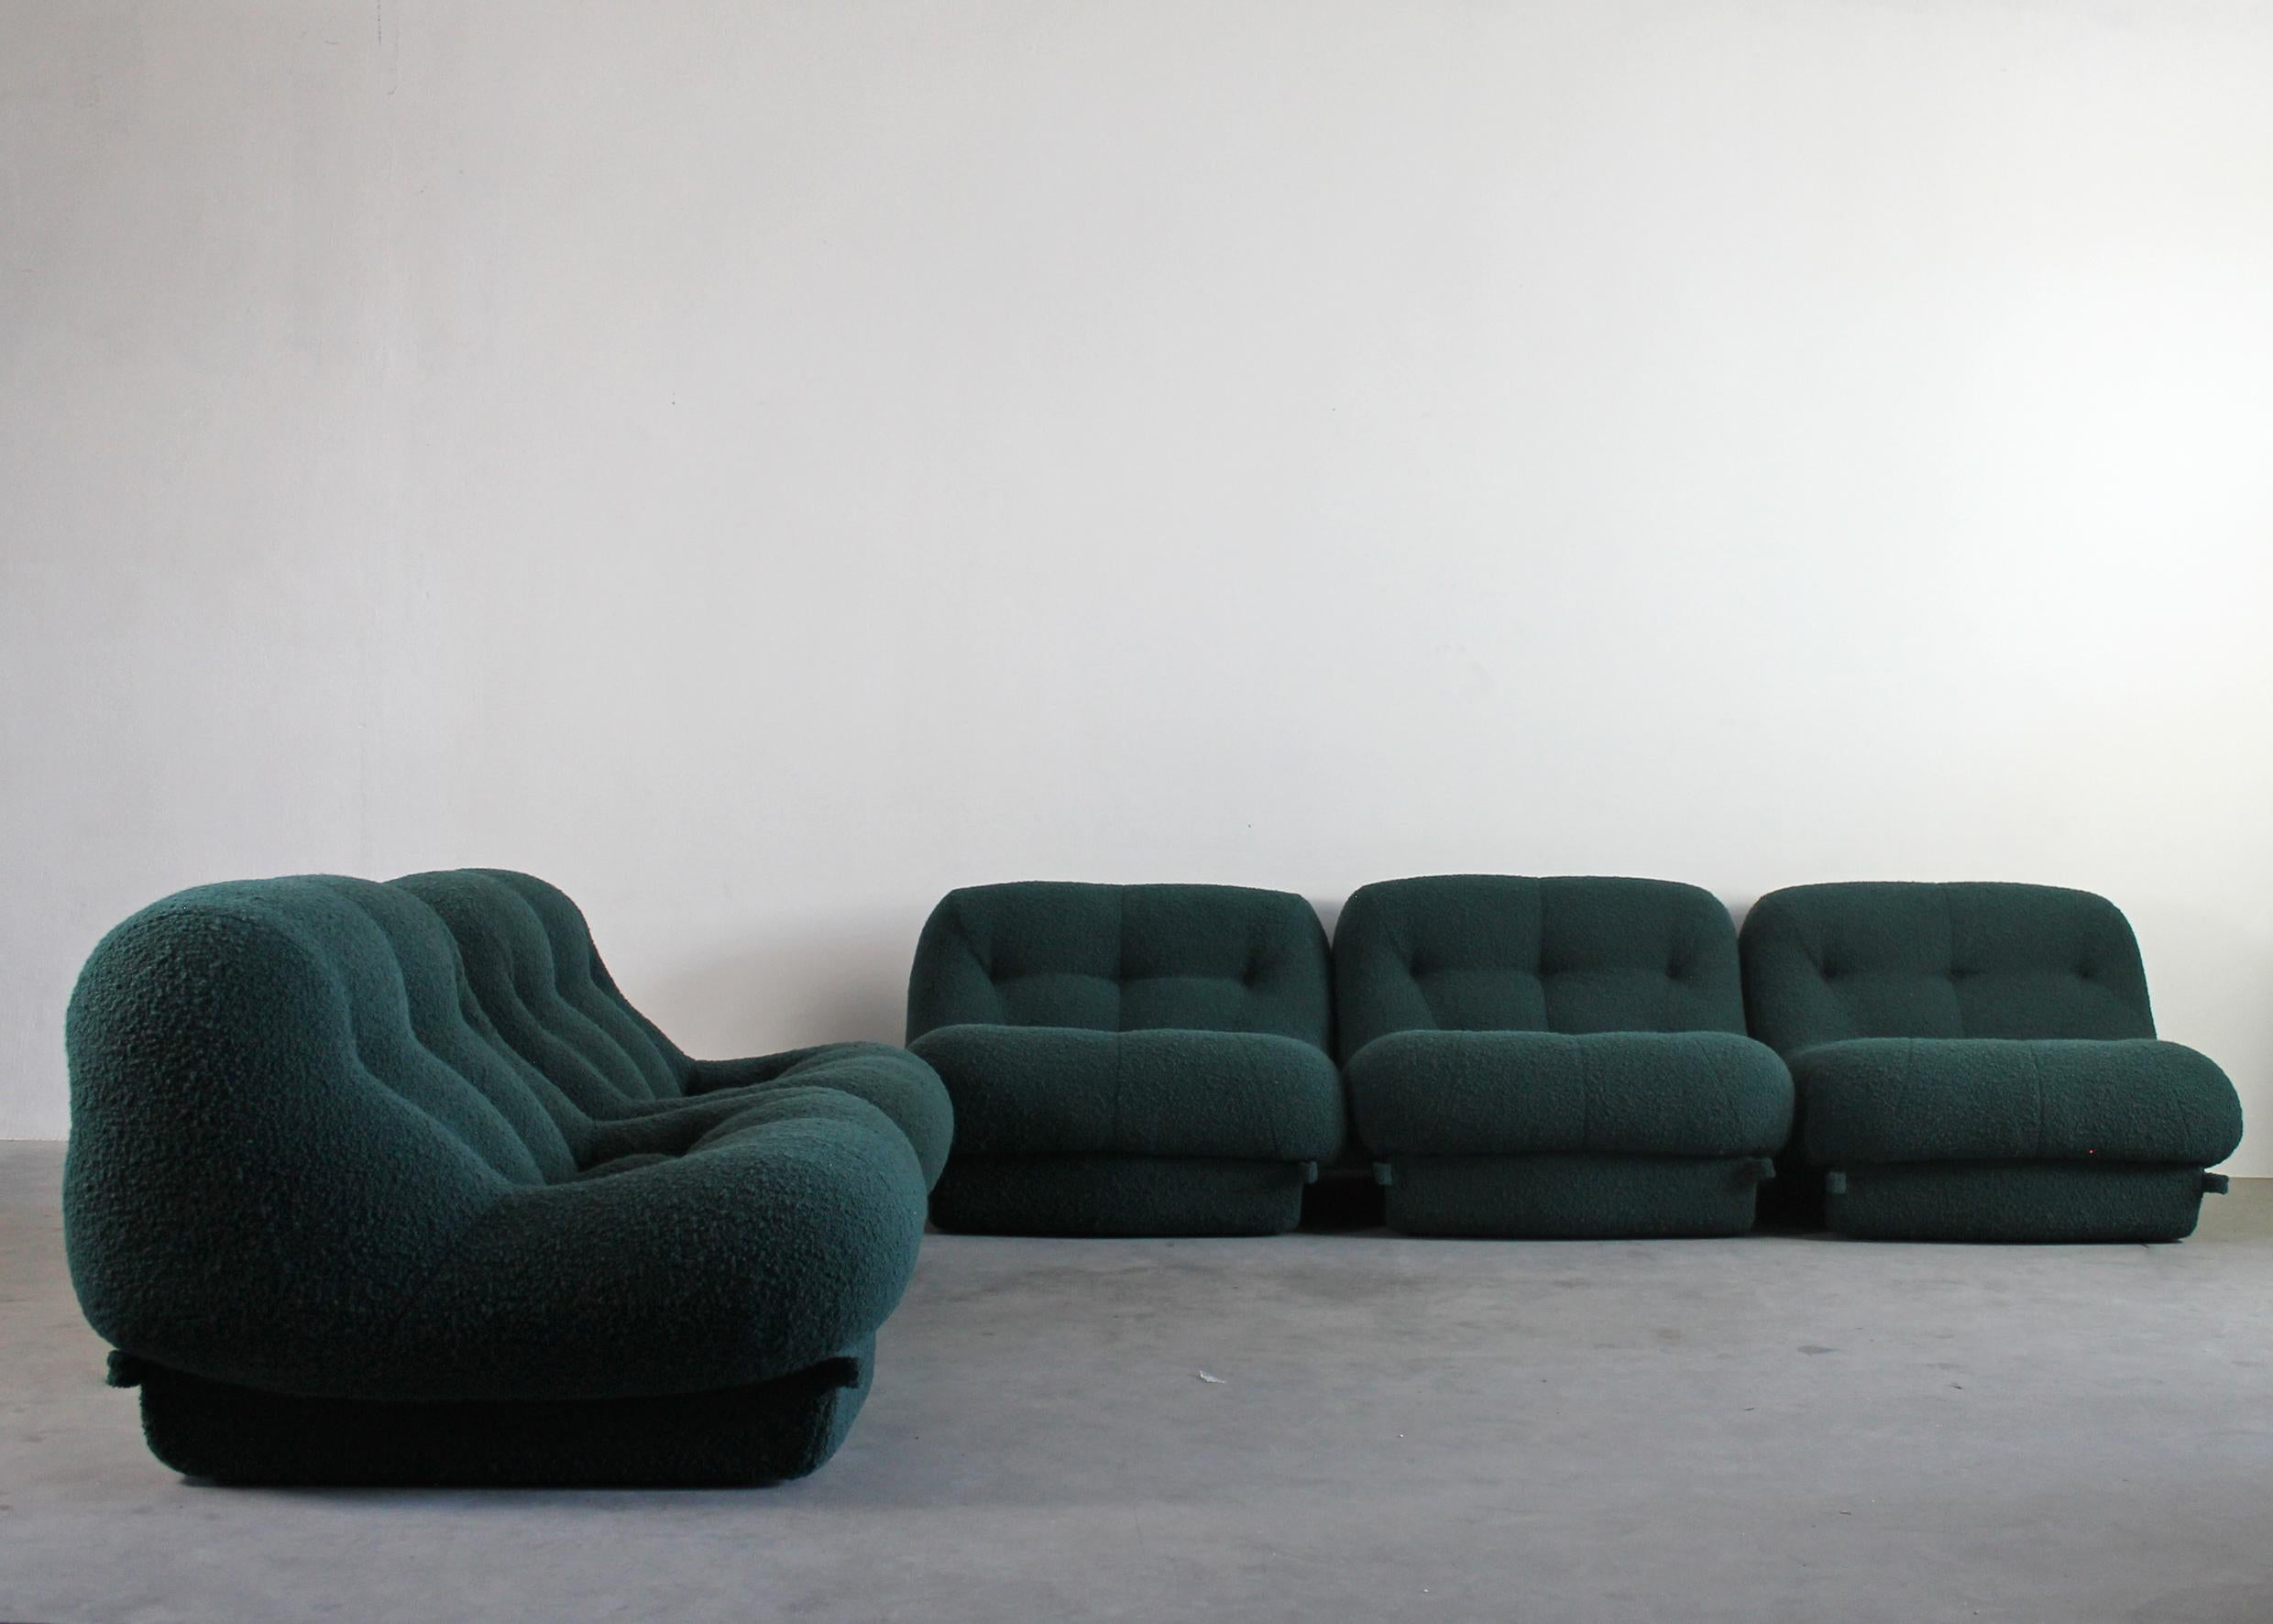 Nuvolone modular sofa composes of five single modules which can be arranged to your own liking. The sofa presents a structure in polyurethane foam upholstered with a dark green fabric, designed by Rimo Maturi for the Italian company MIMO, Padova